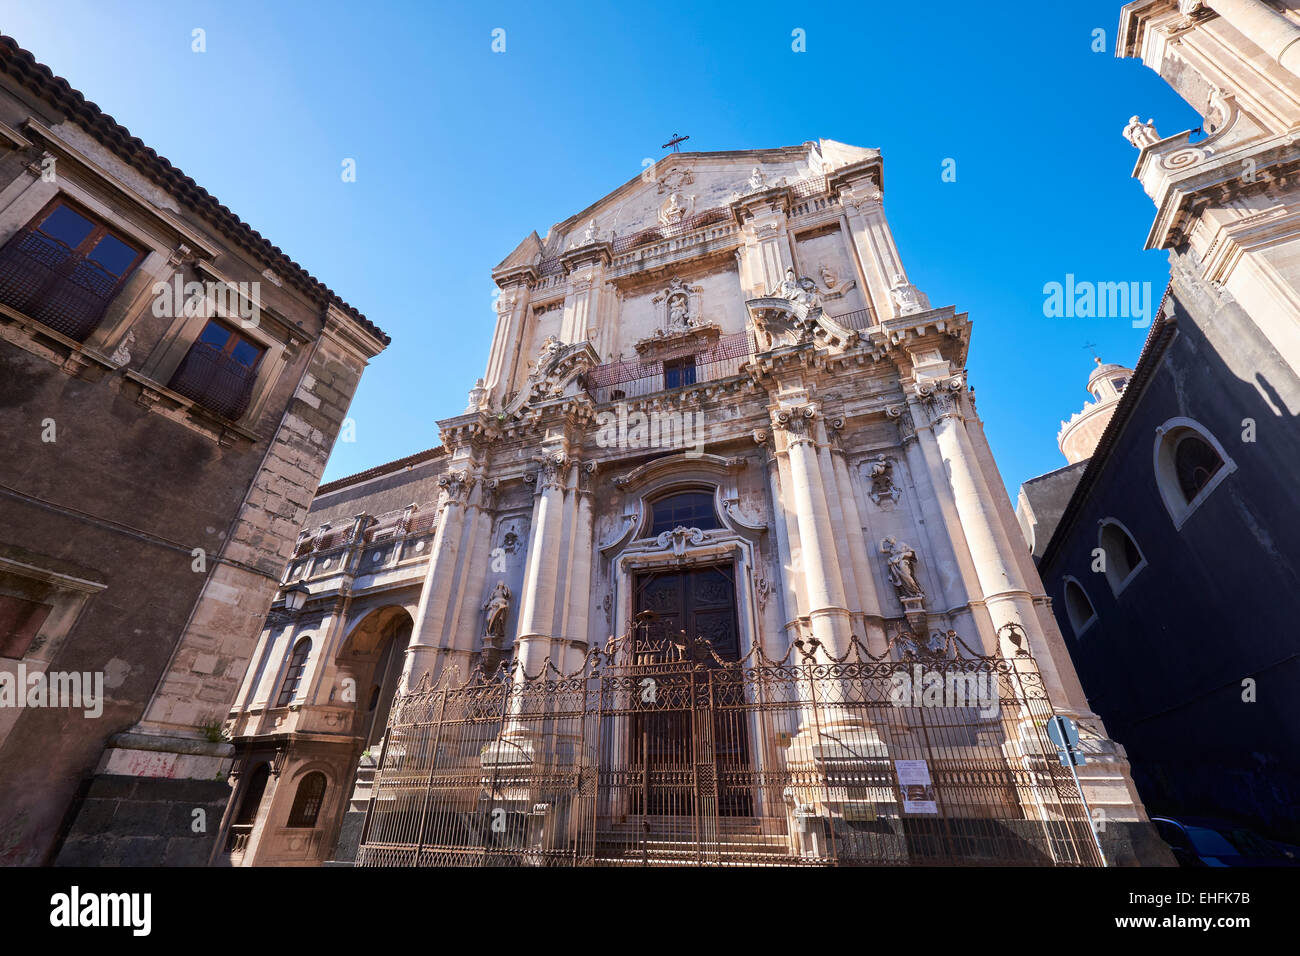 San Benedetto Religious Architecture in Catania, Sicily, Italy. Italian Tourism, Travel and Holiday Destination. Stock Photo